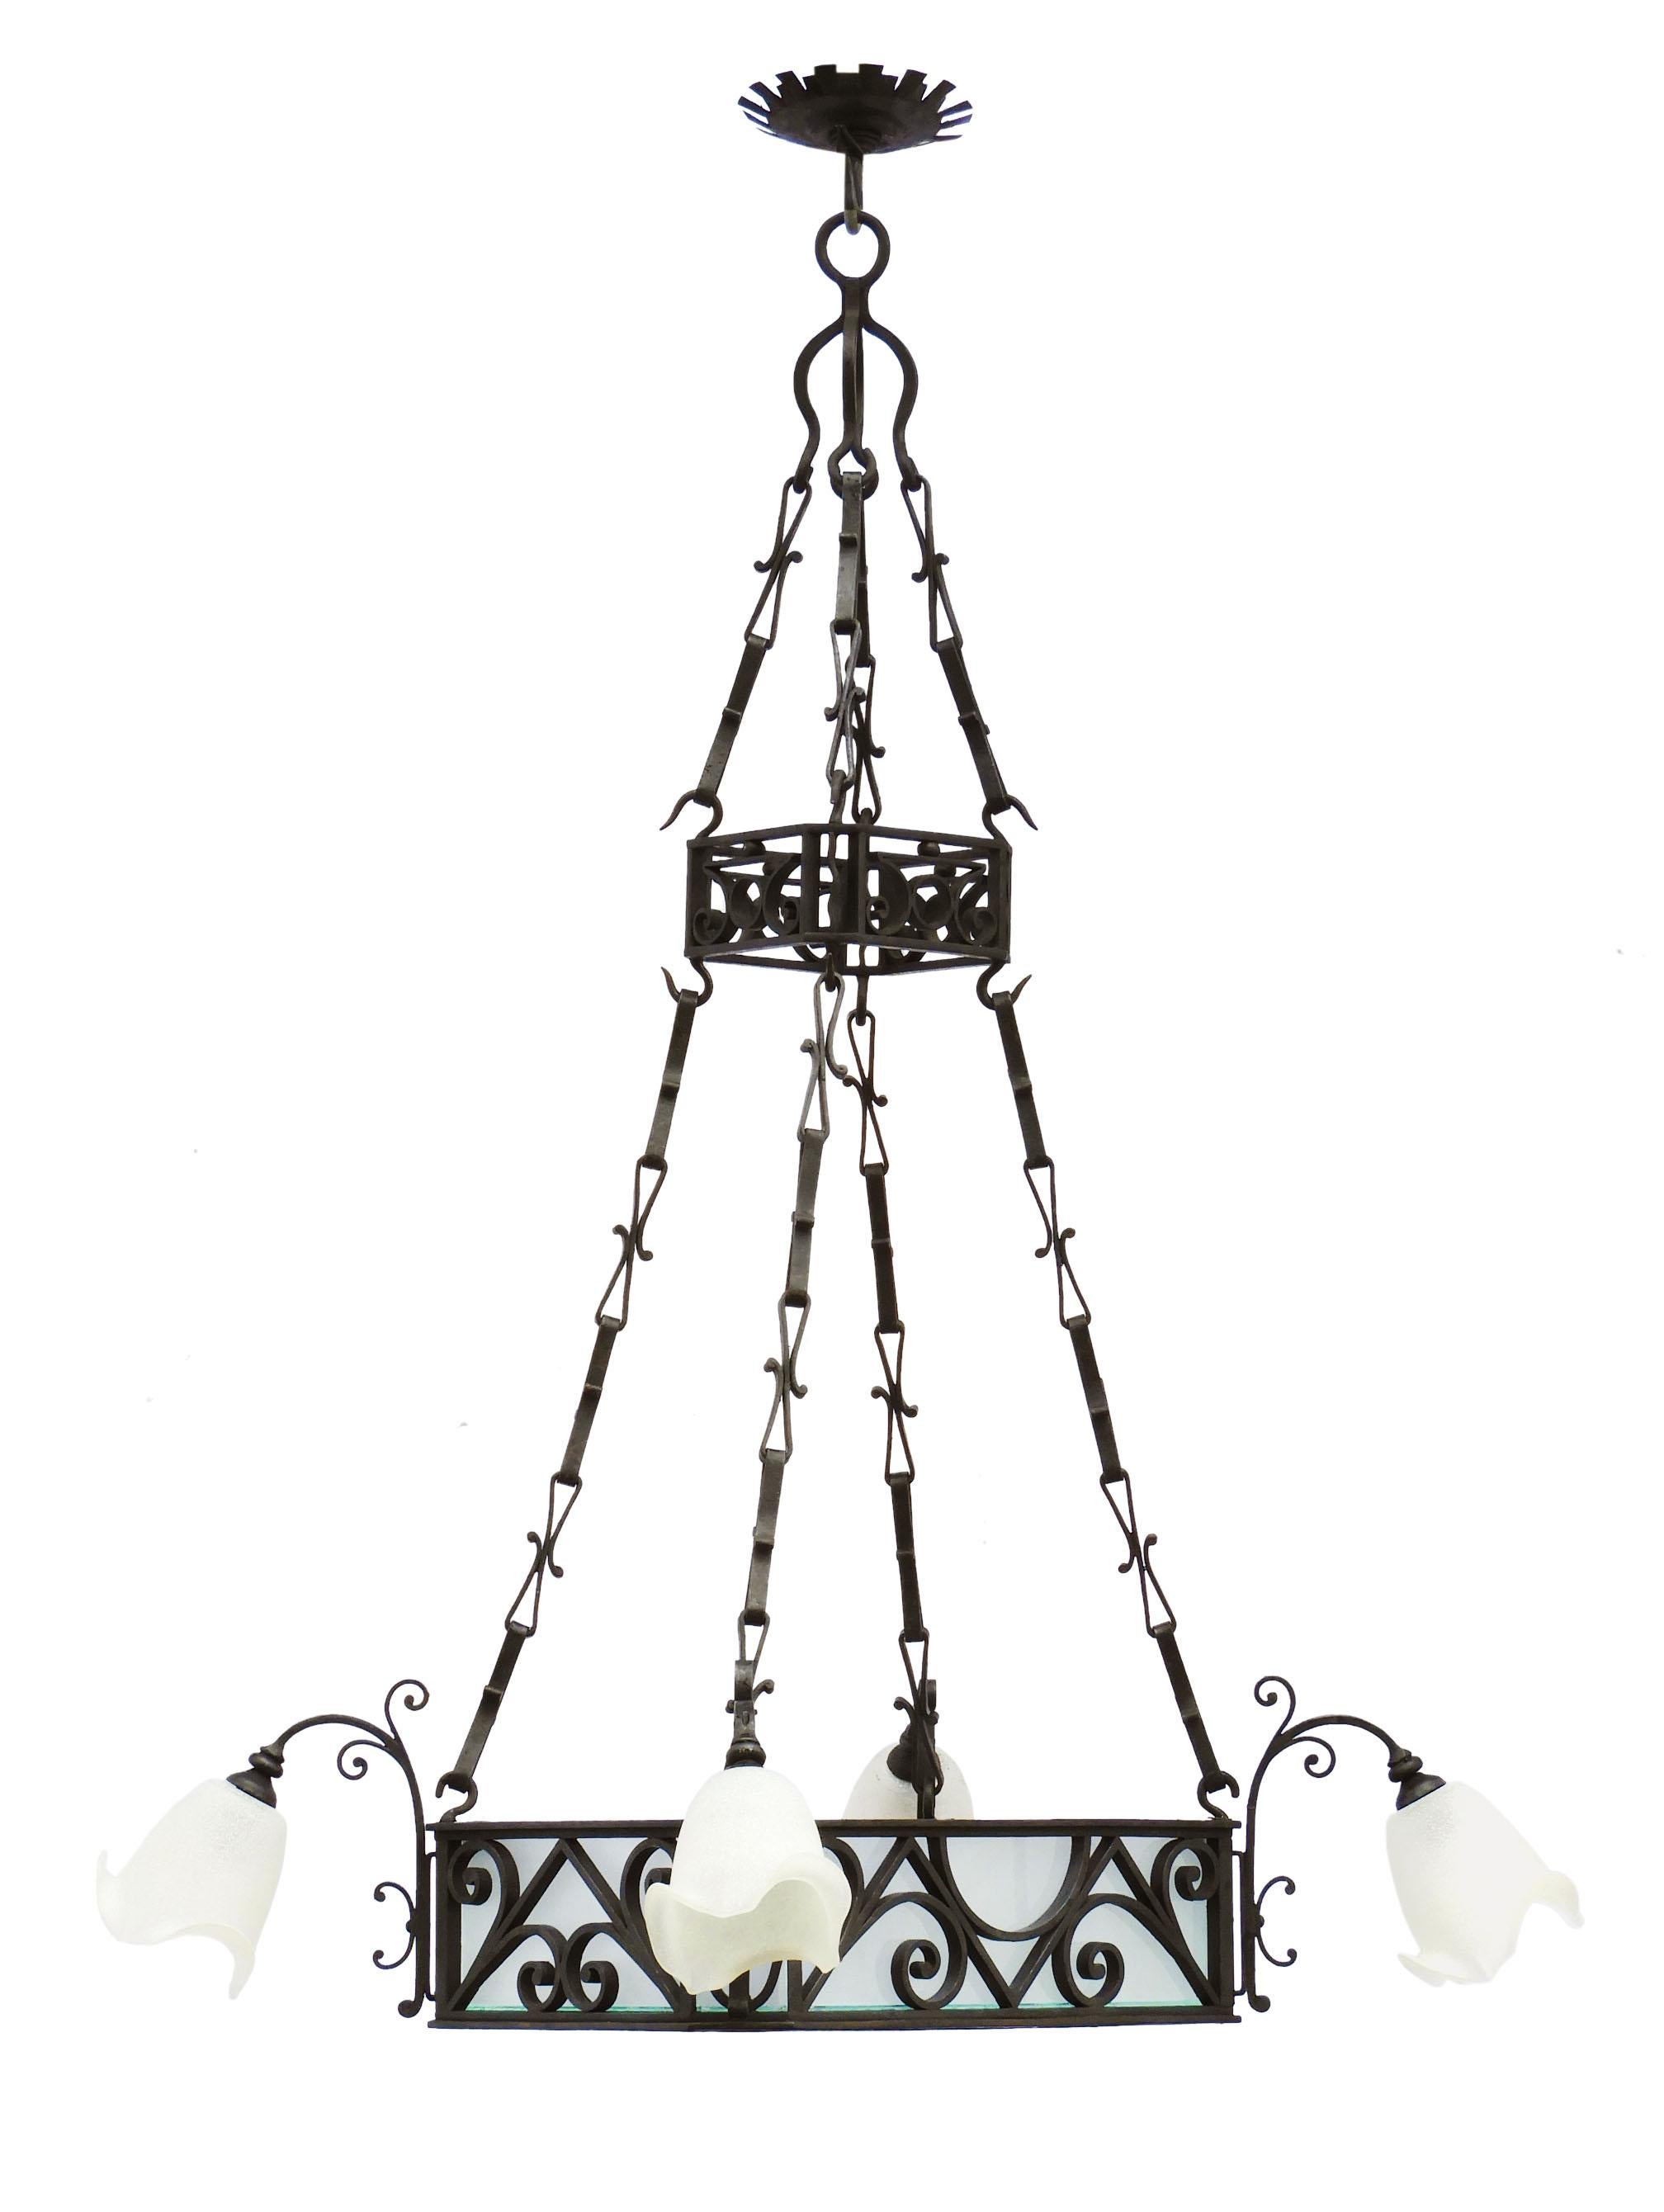 20th Century Pair of Antique Wrought Iron 8-Light Chandeliers C1900 French Belle Époque For Sale